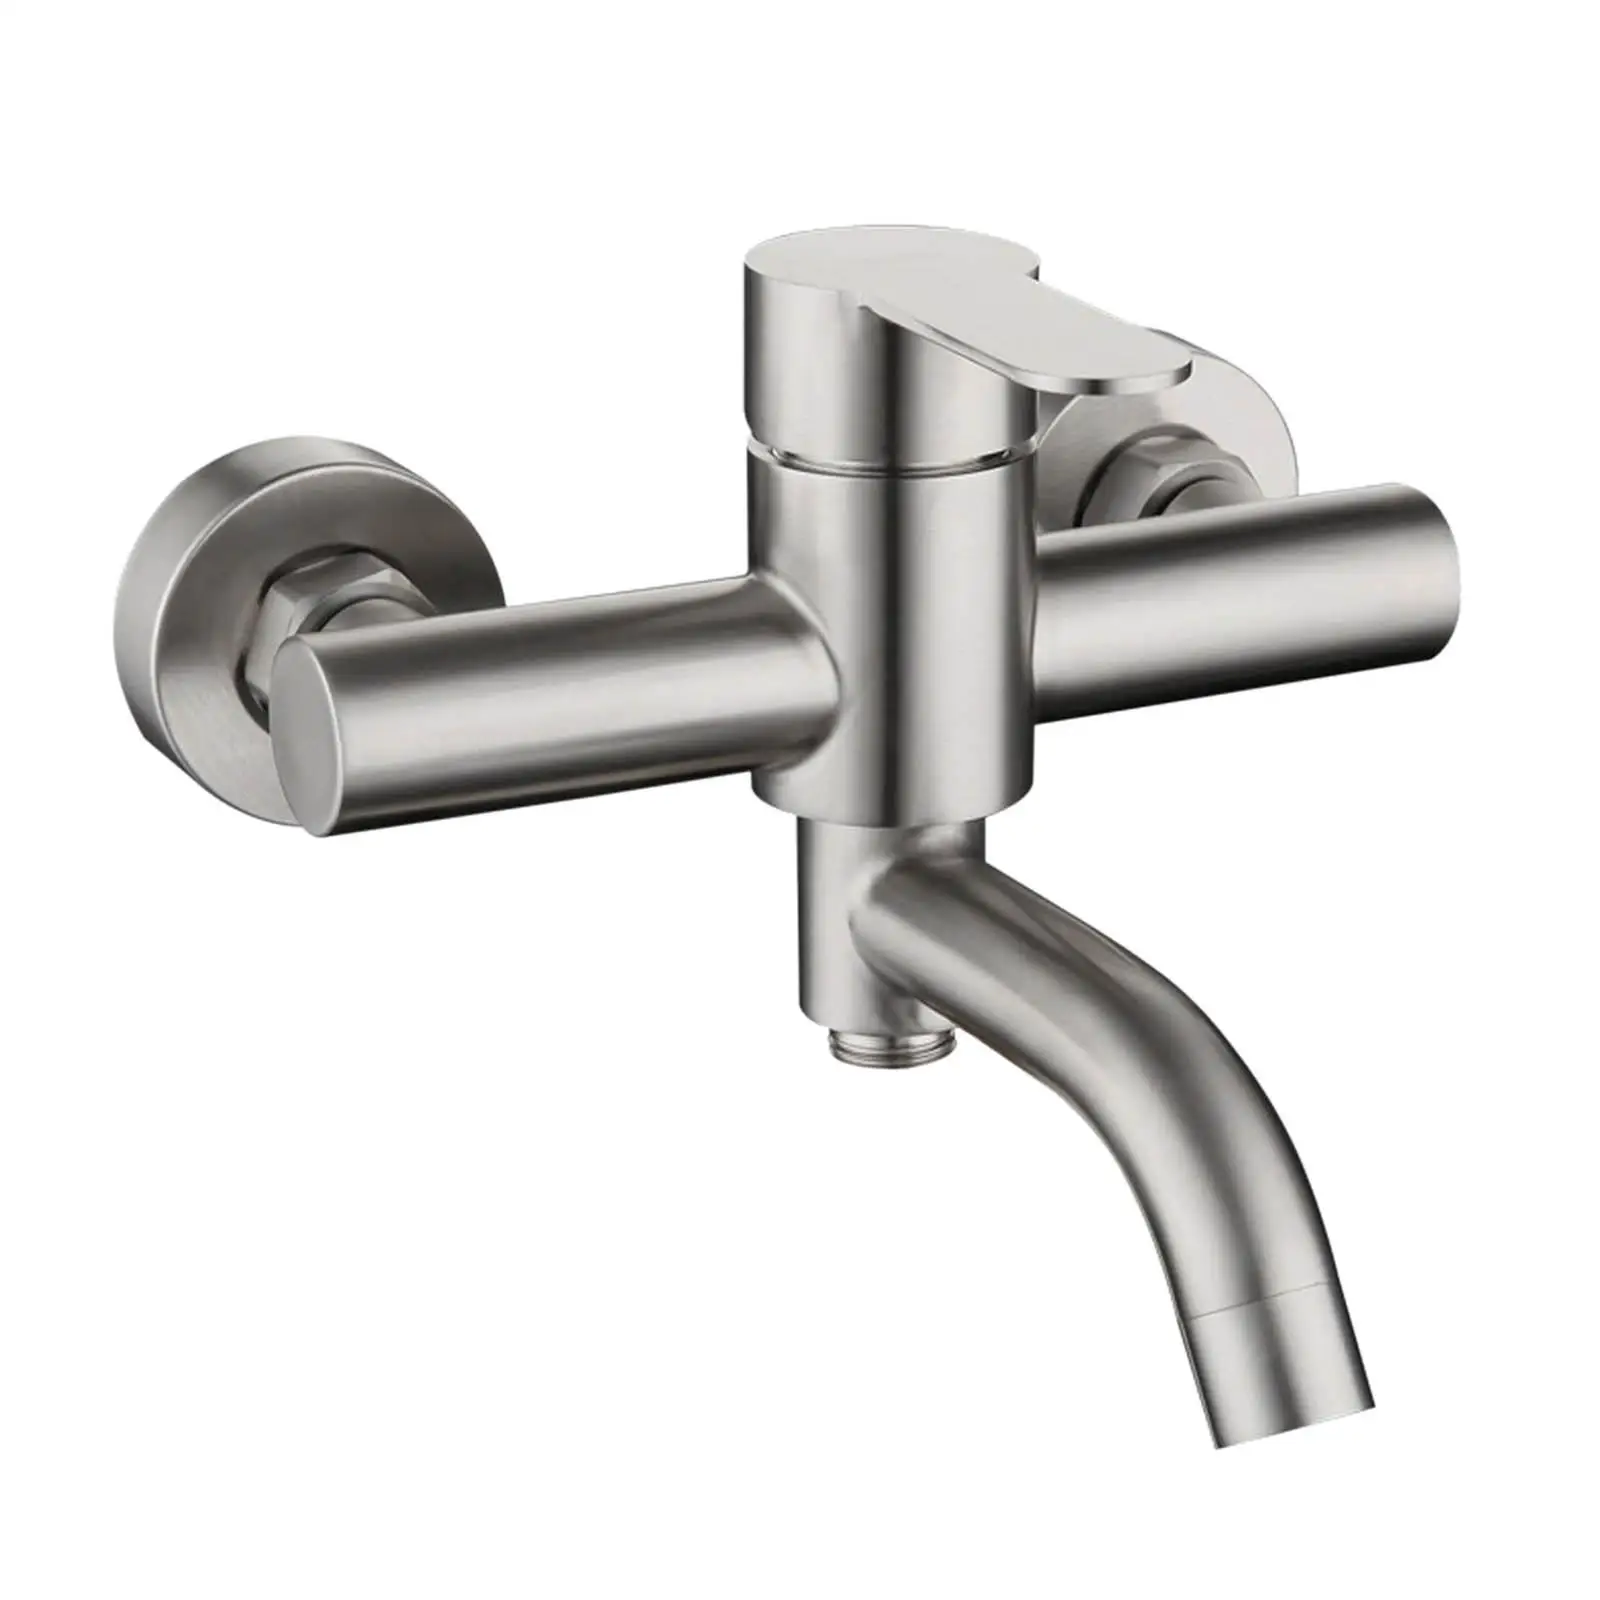 Stainless Steel Shower Mixer Faucet Hole Spacing 150mm Bathroom System